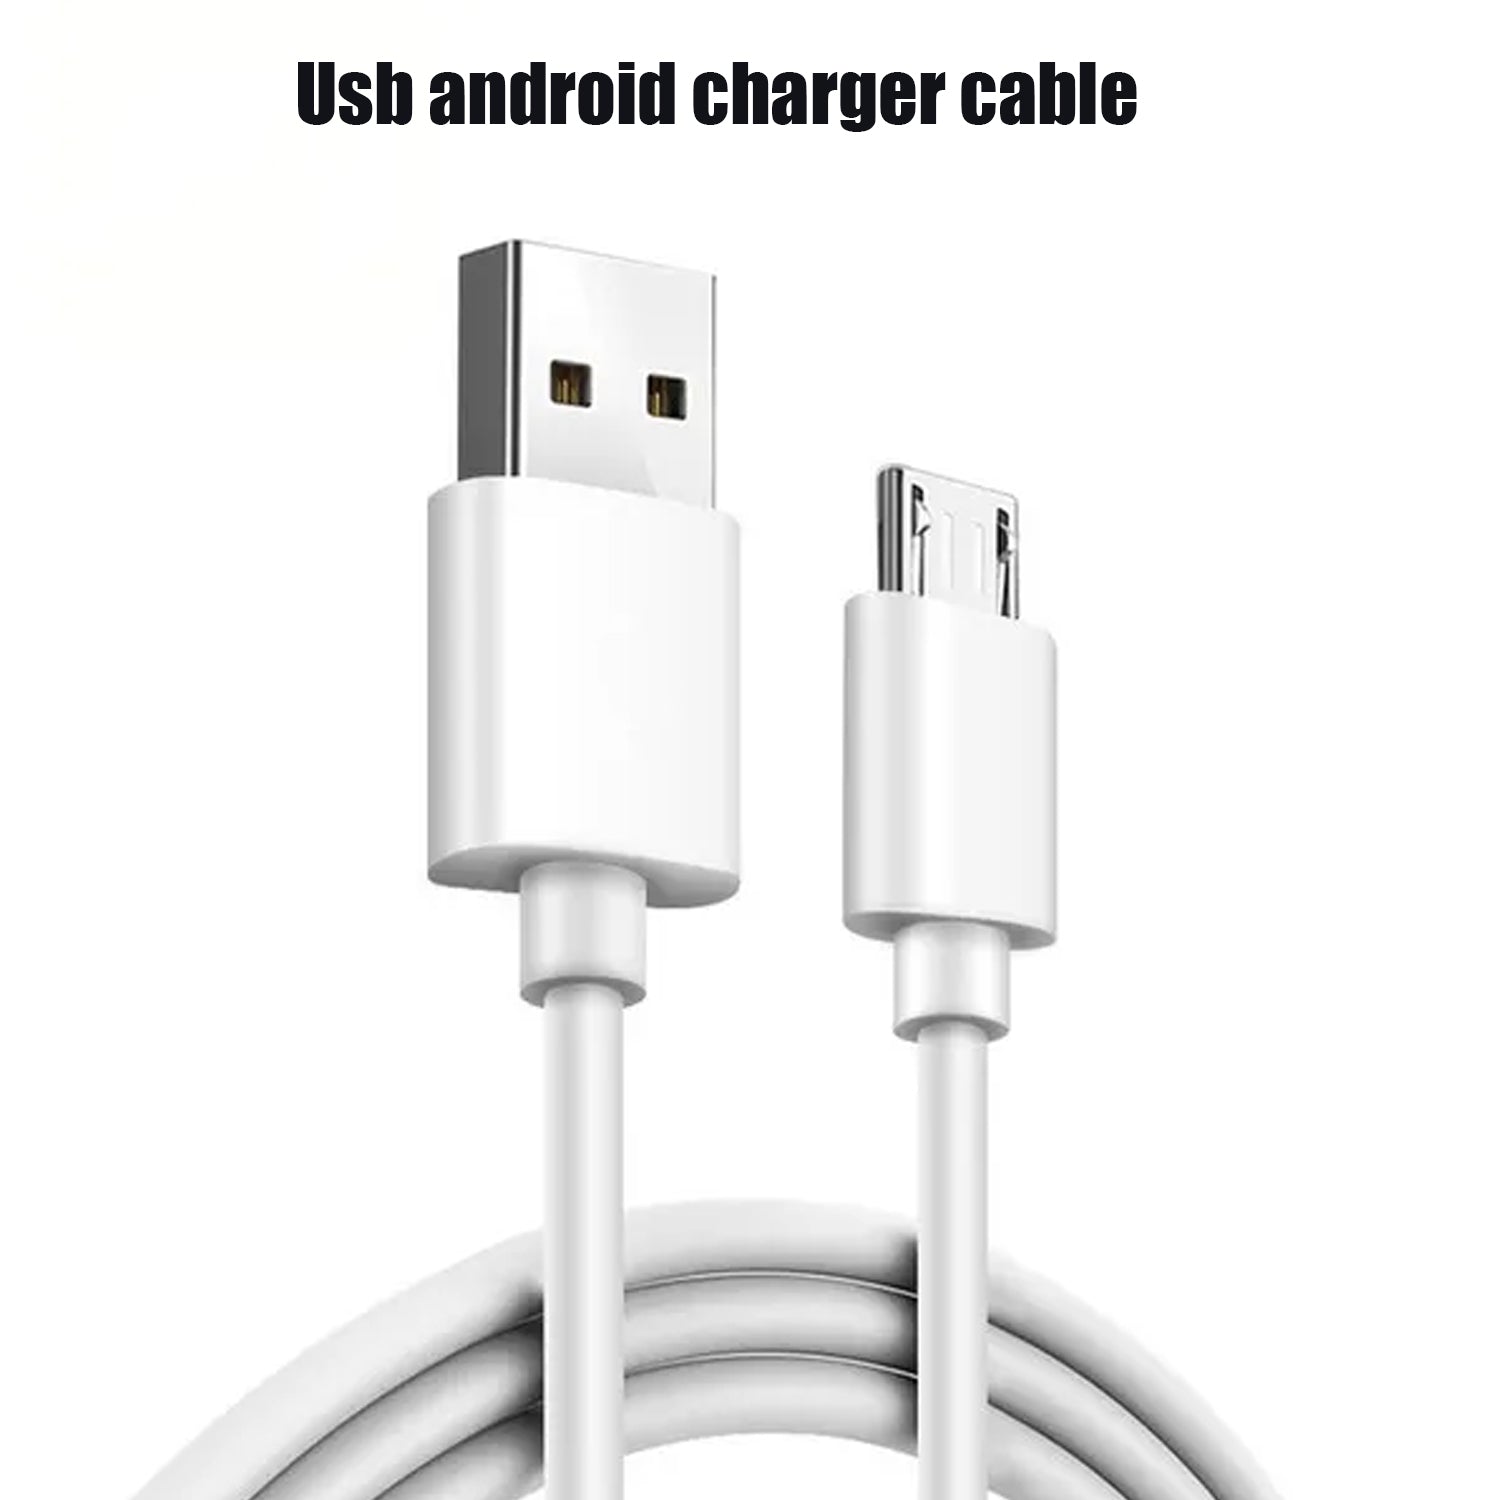 6485 Fast Charging for android & Data Transfer Extra Tough Long Micro Cable for All Compatible Smartphone and Tablets DeoDap